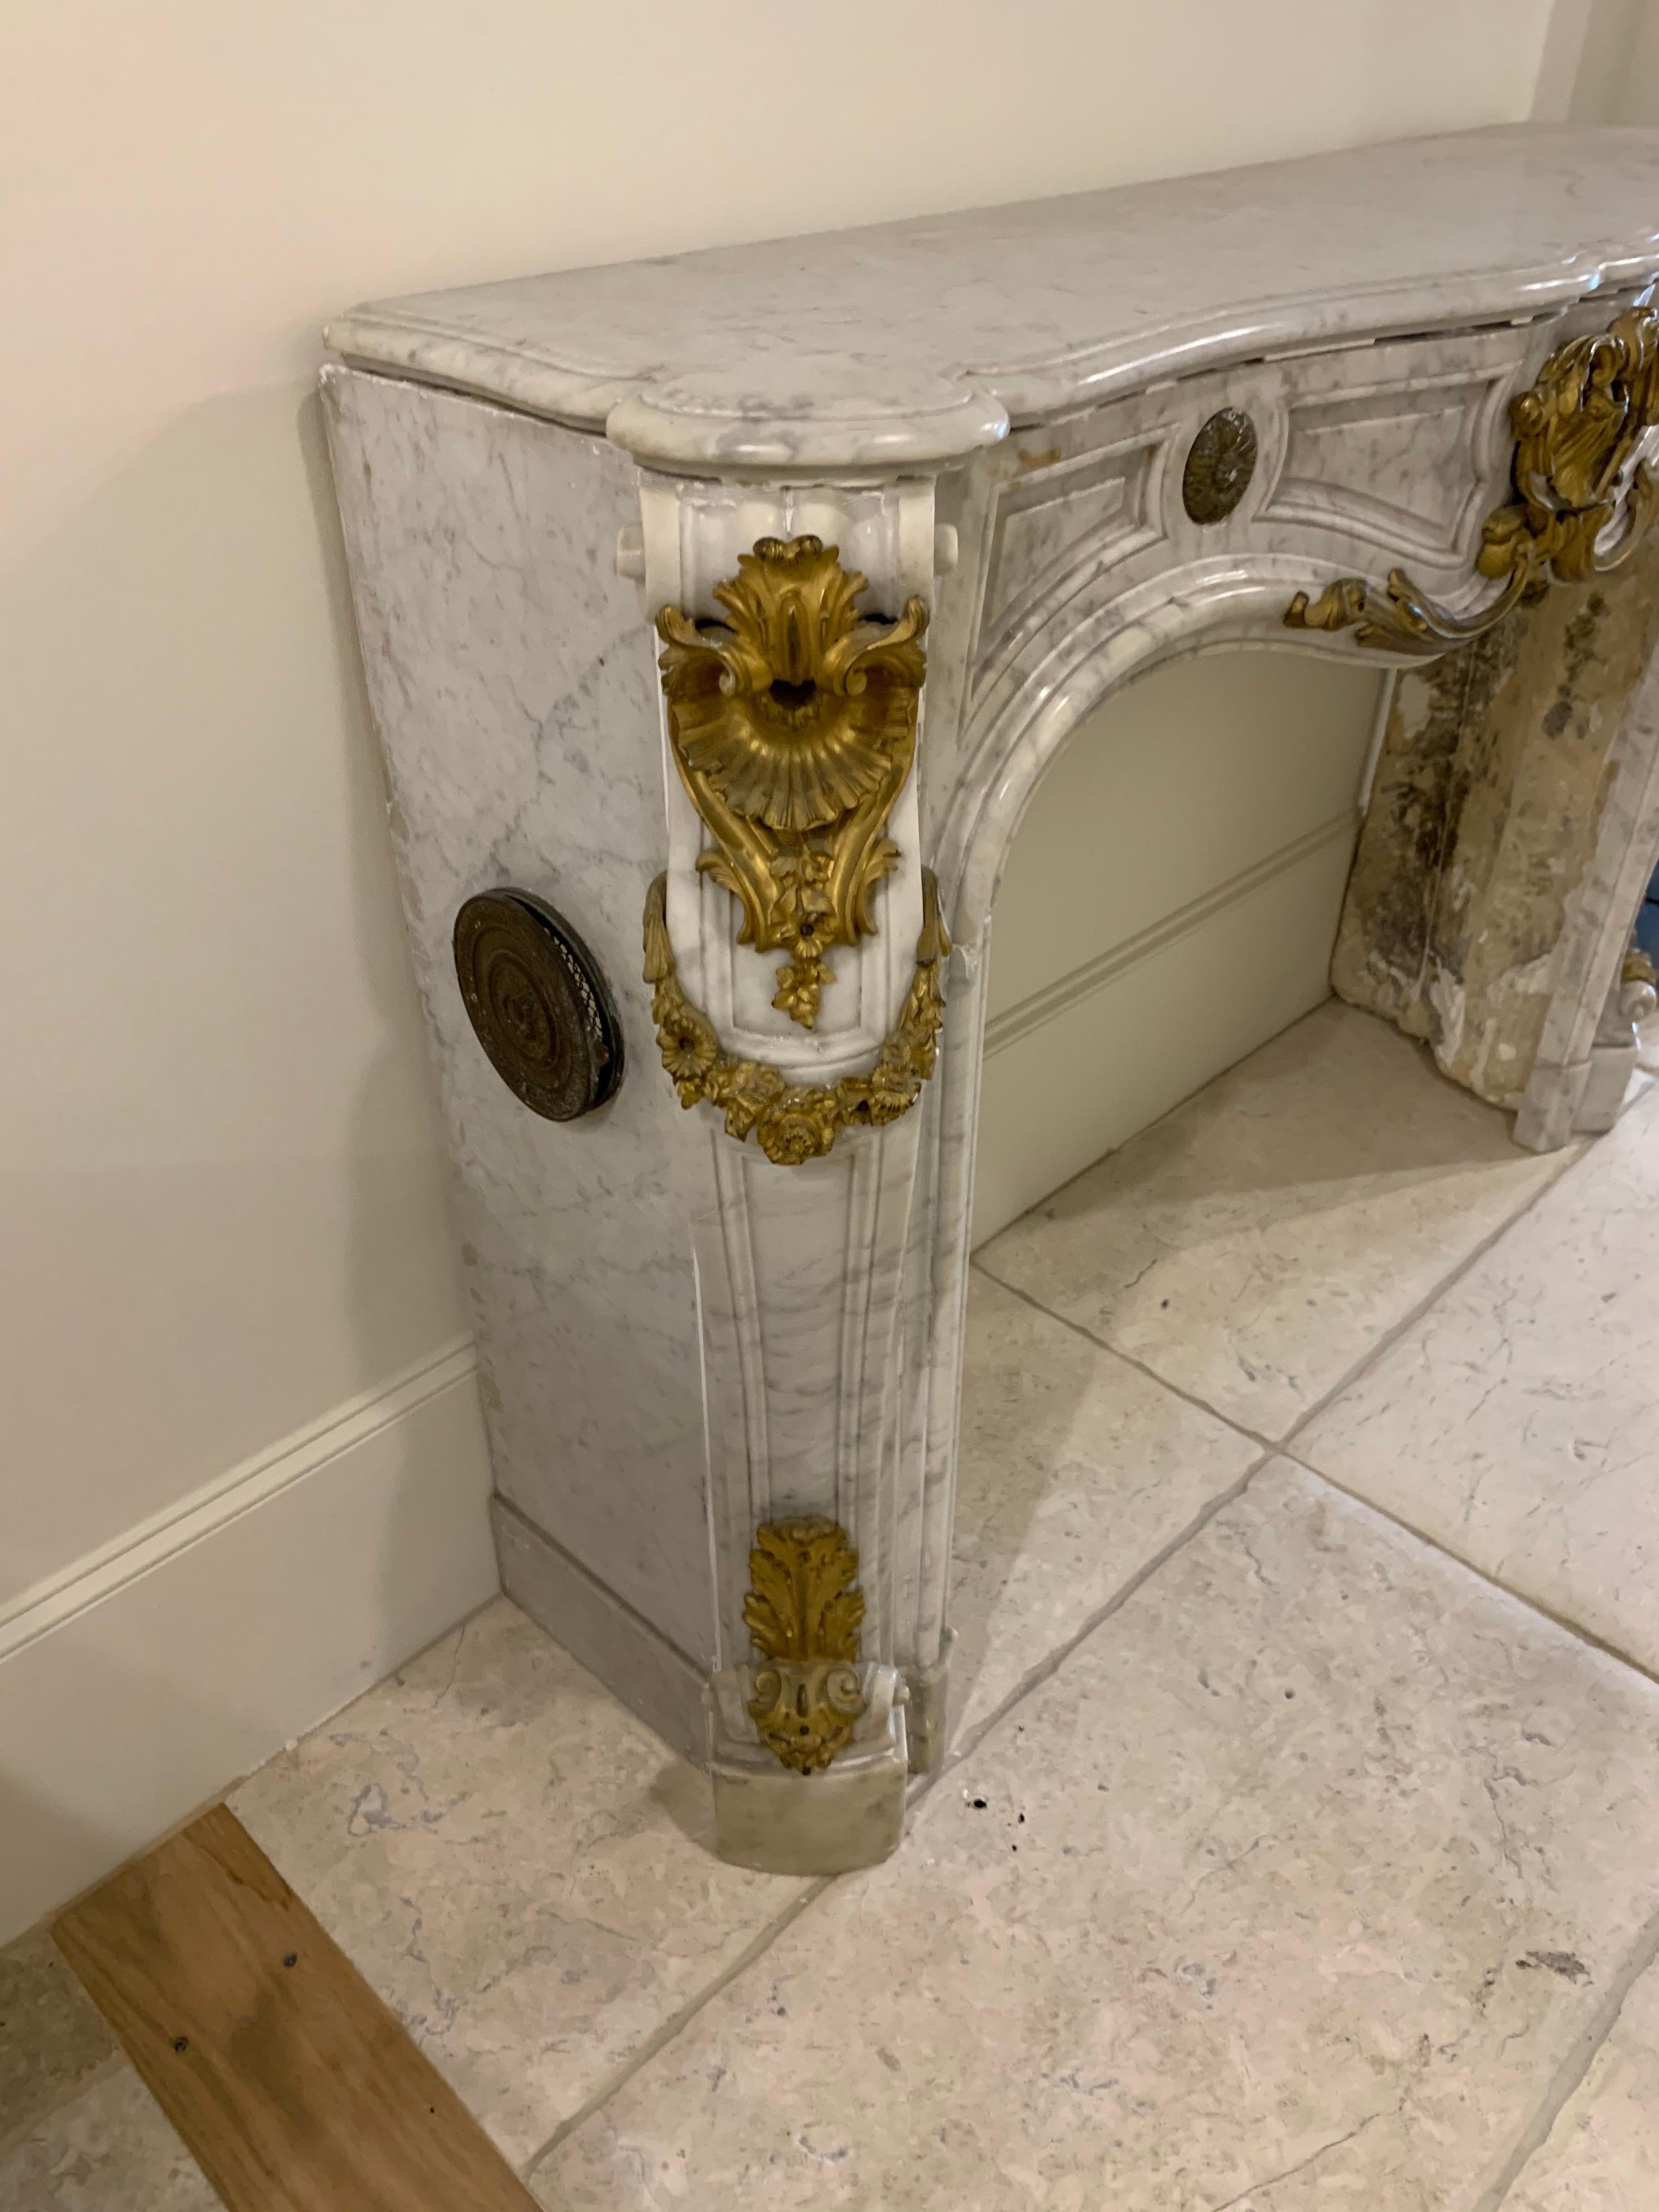 Fabulous 18th century French Louis XV style Carrara marble and gilt bronze mantel. 
Beautiful marble and nice decorative designs on the gilt sections. Very elegant for a fine home!